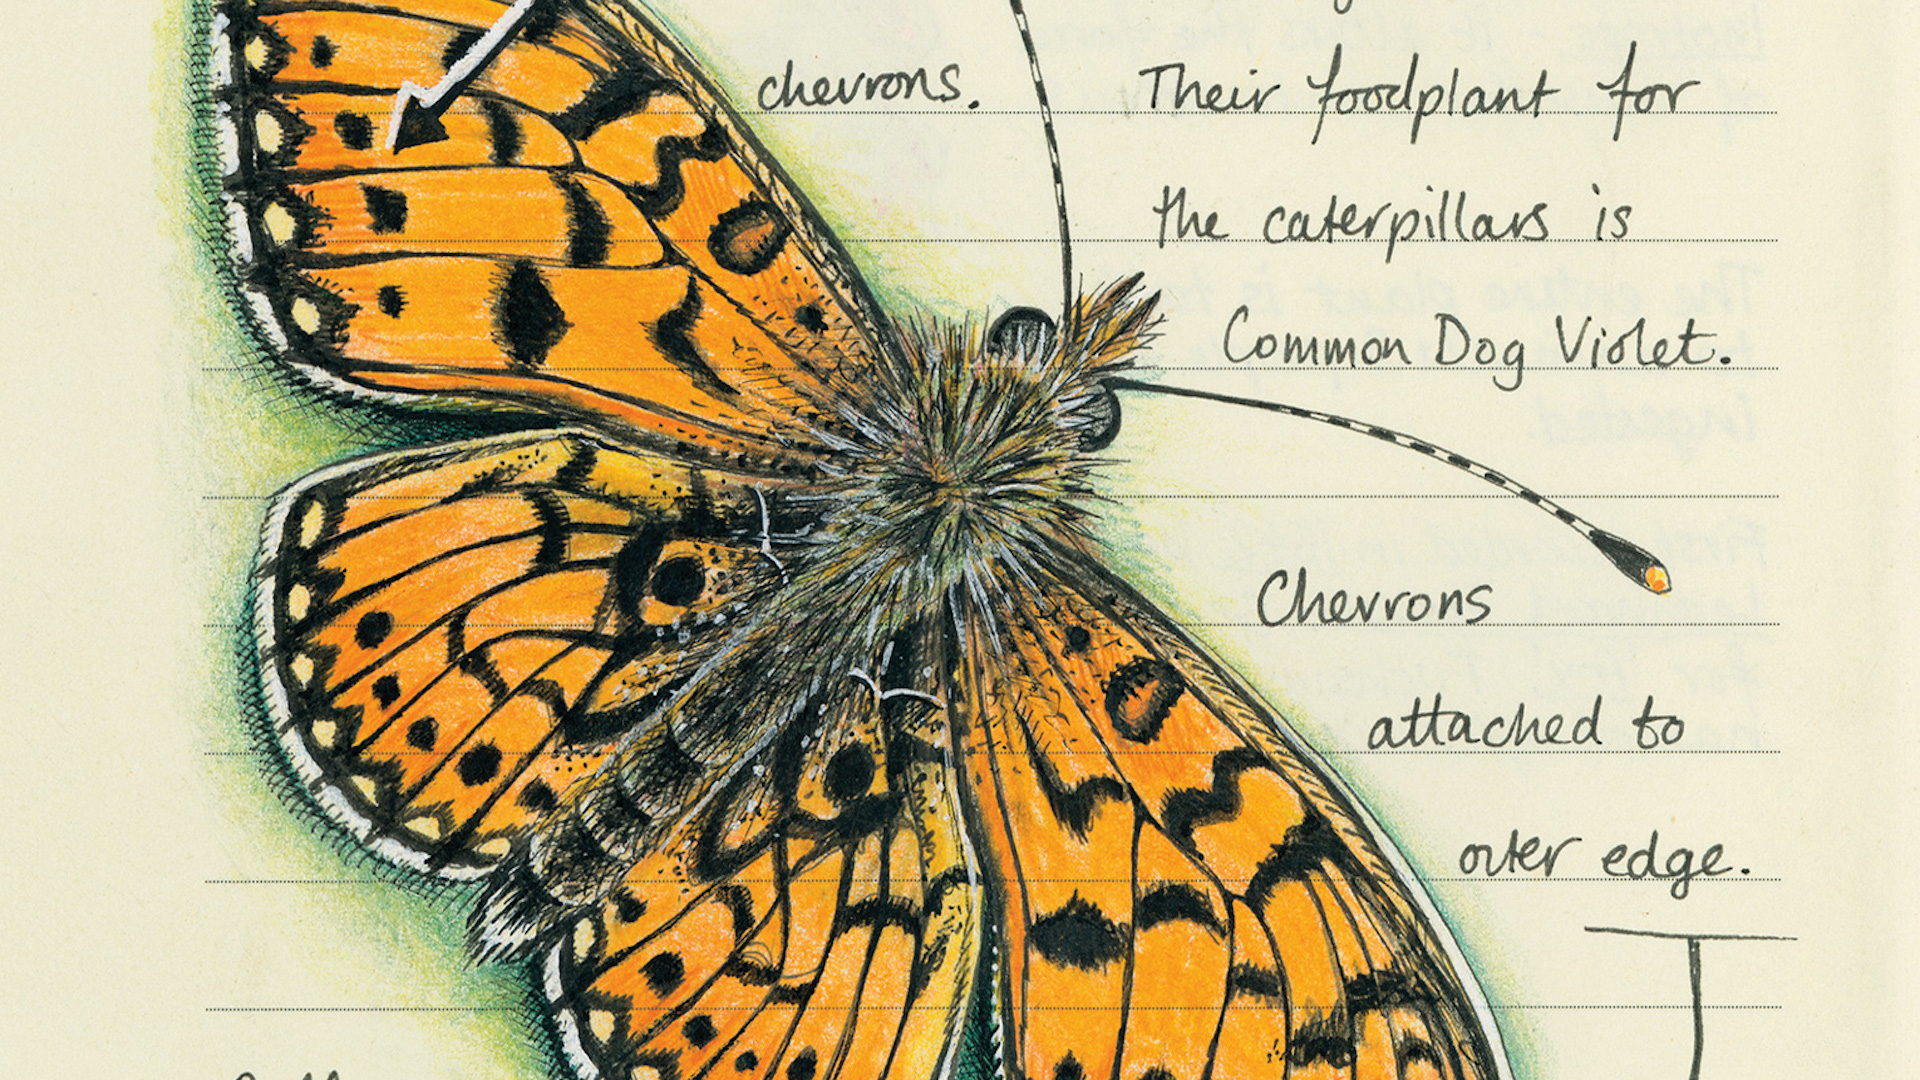 an illustration of a yellow and black butterly, surrounded by handwritten notes, which say "chevrons attached to outer edge"